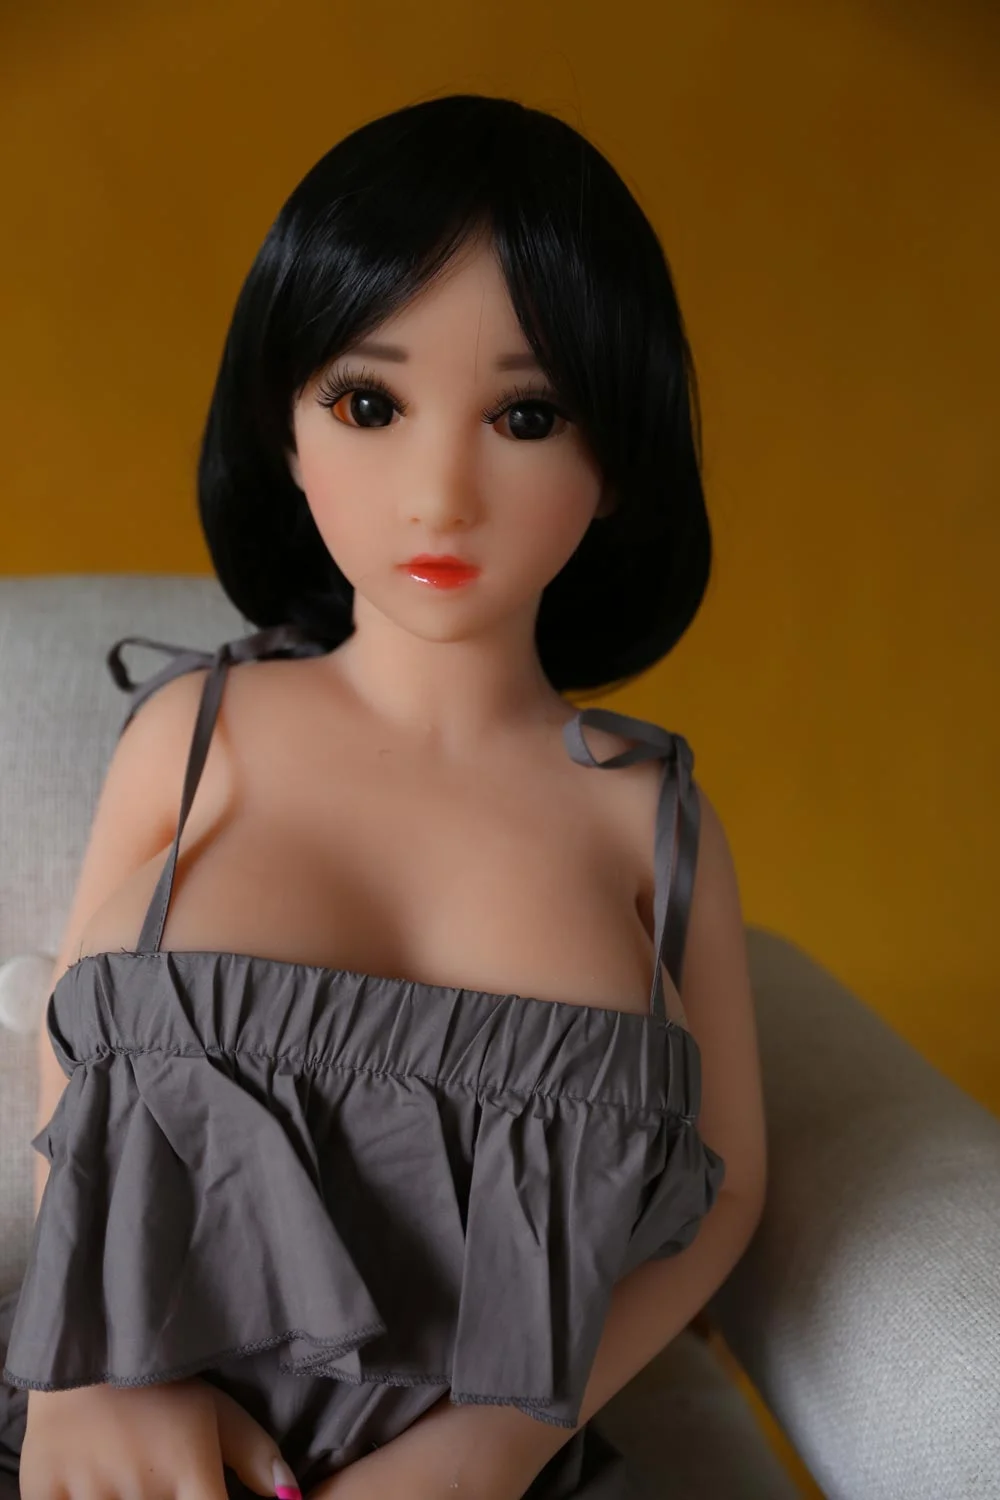 Mini sex doll with black hair and big eyes